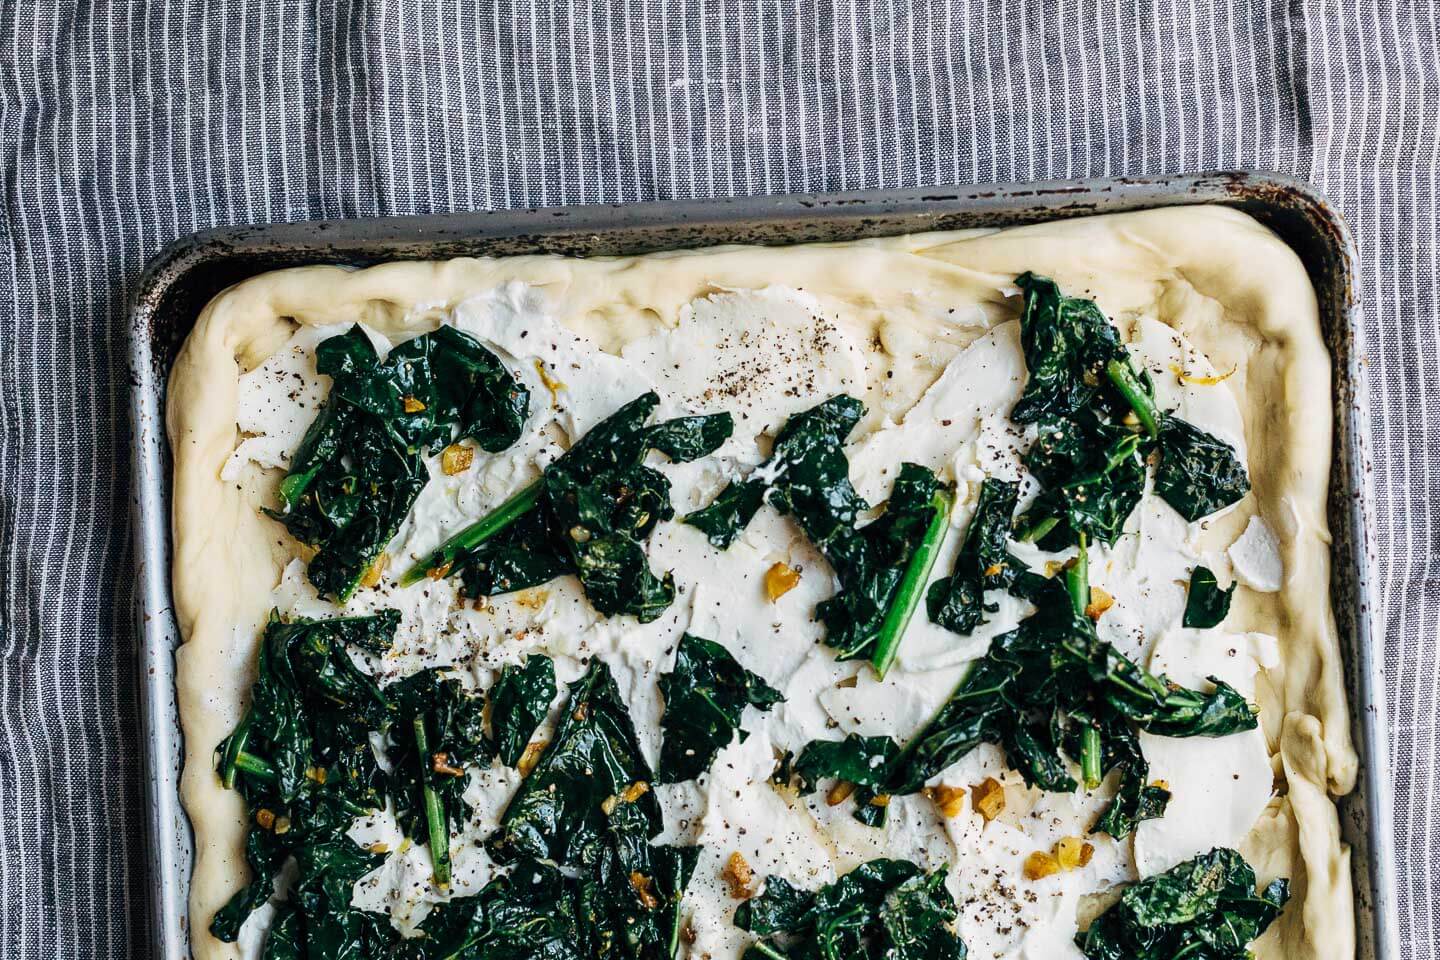 sausage and greens grandma-style pizza with toasted breadcrumbs // brooklyn supper